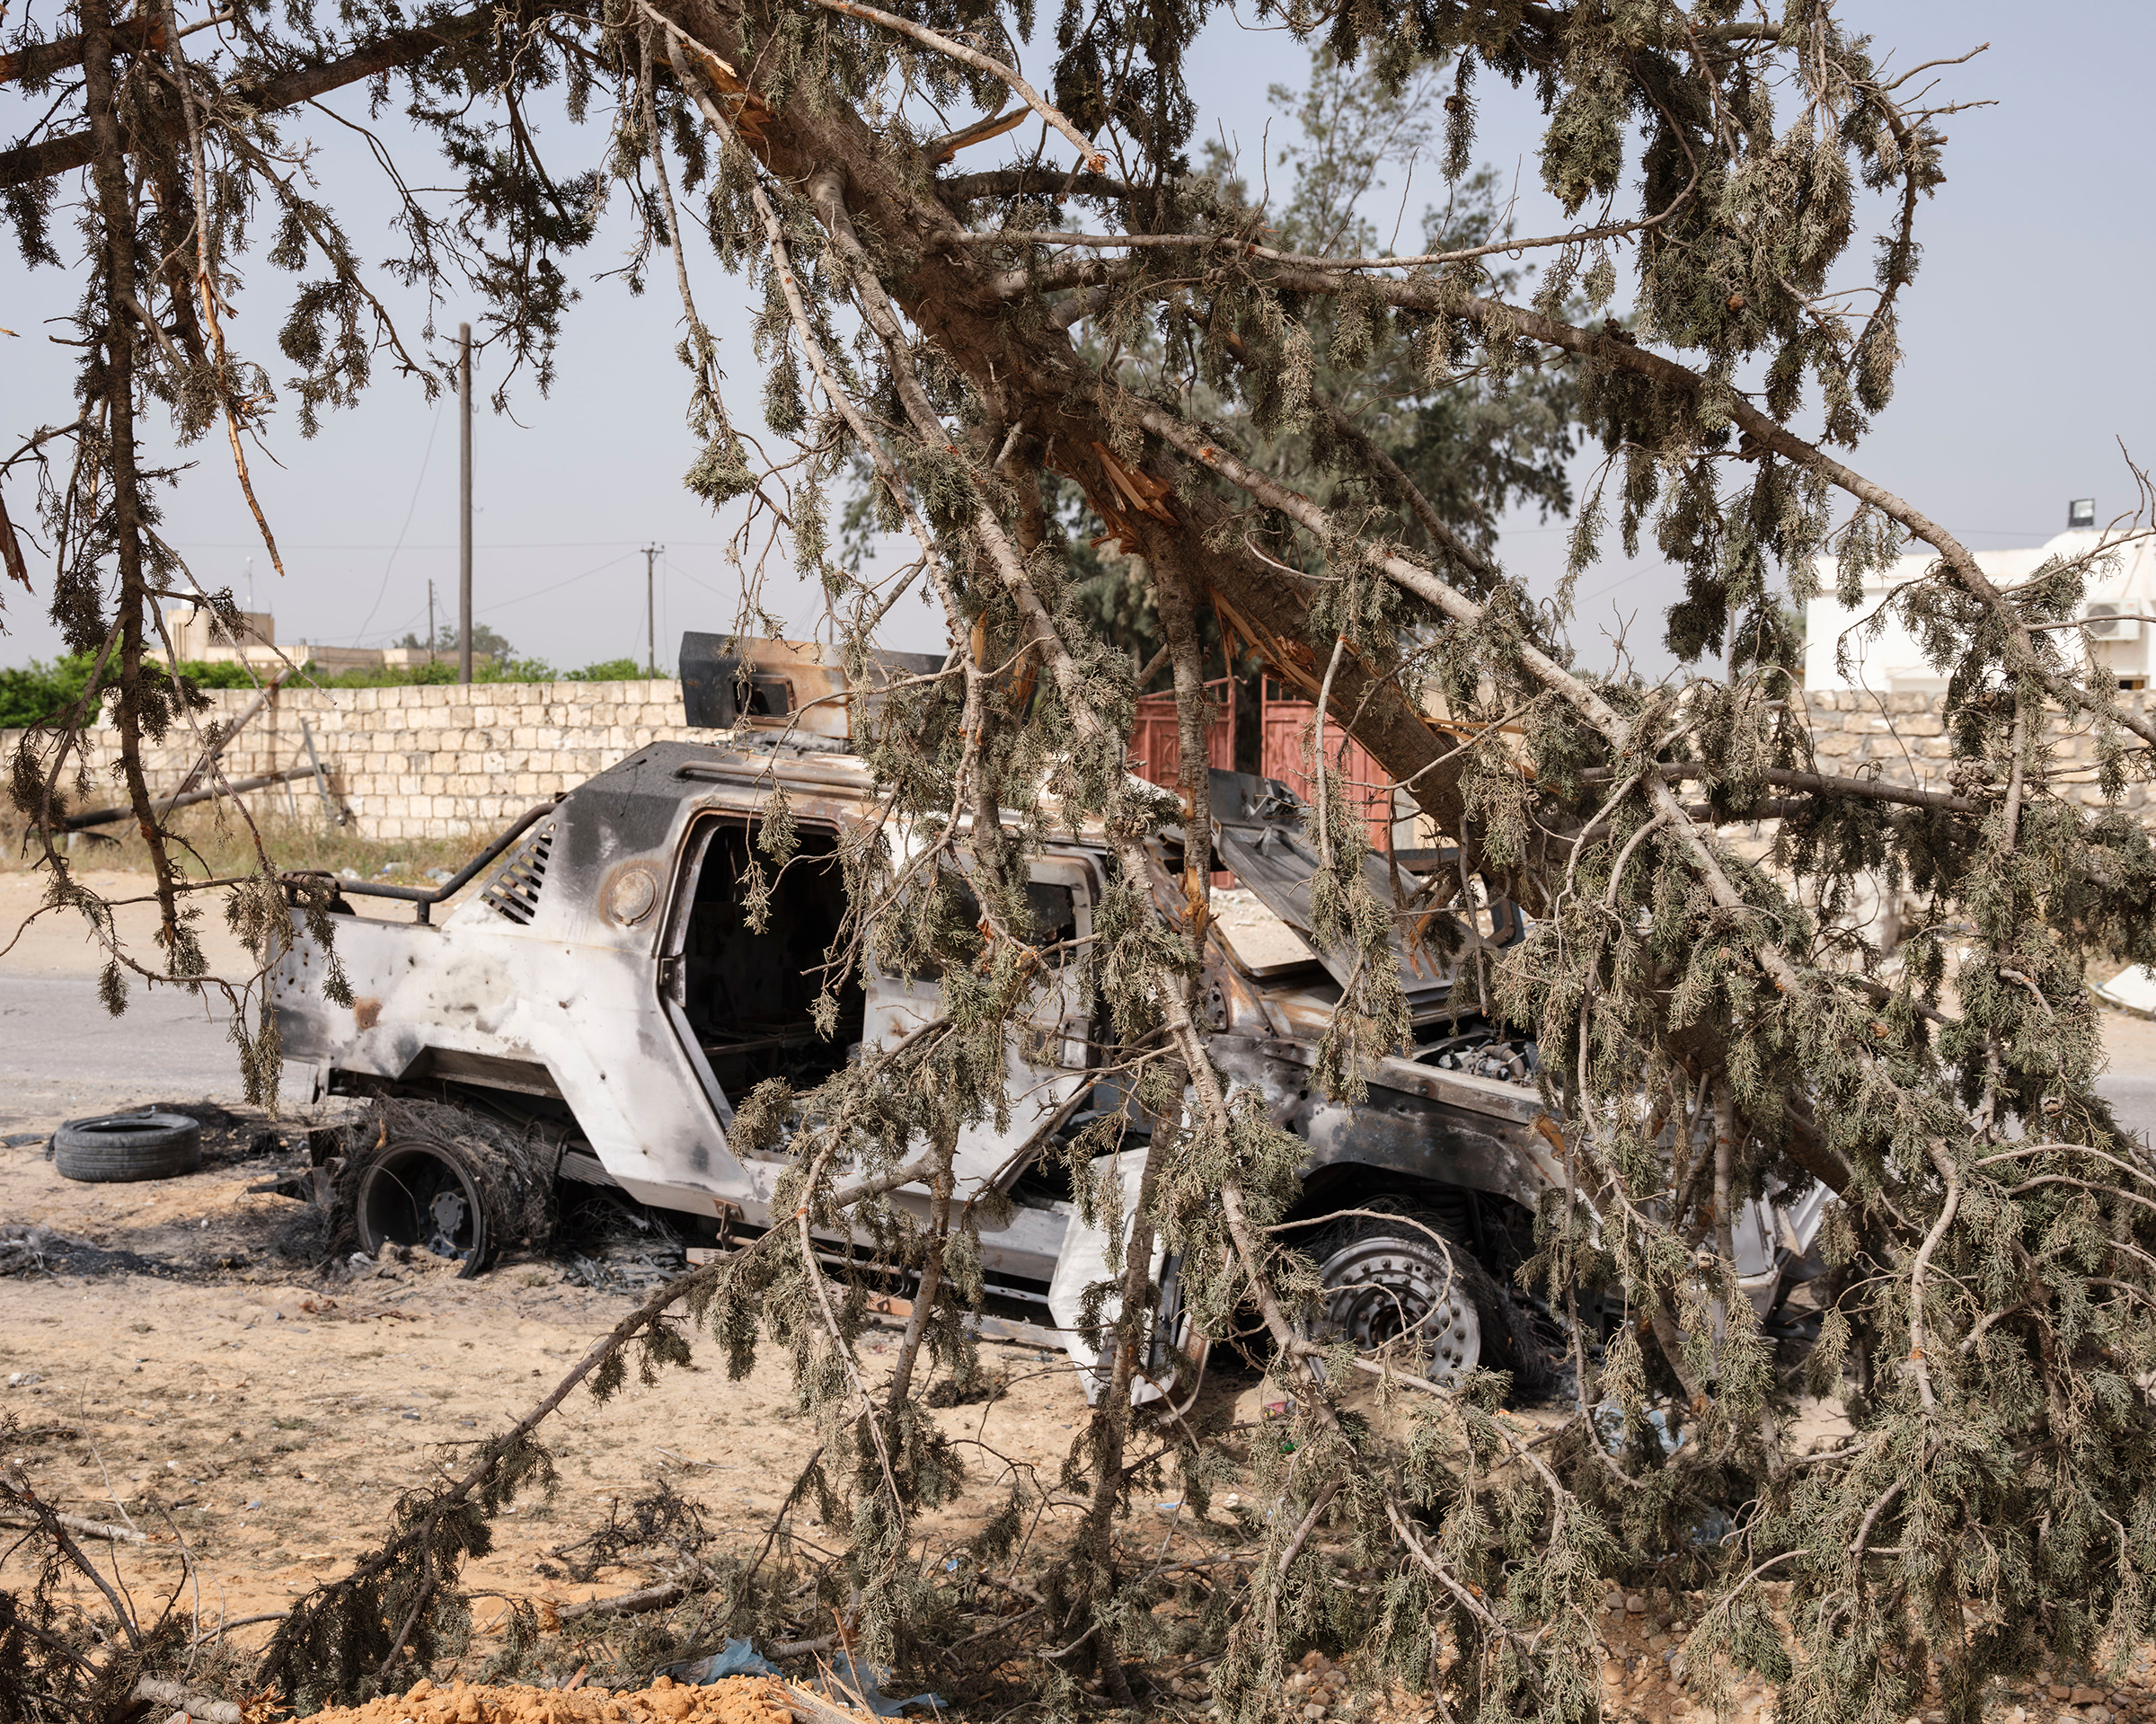 An armored vehicle of fighters loyal to Haftar was destroyed by GNA troops in the Ain Zara area in April. (Lorenzo Meloni—Magnum Photos)